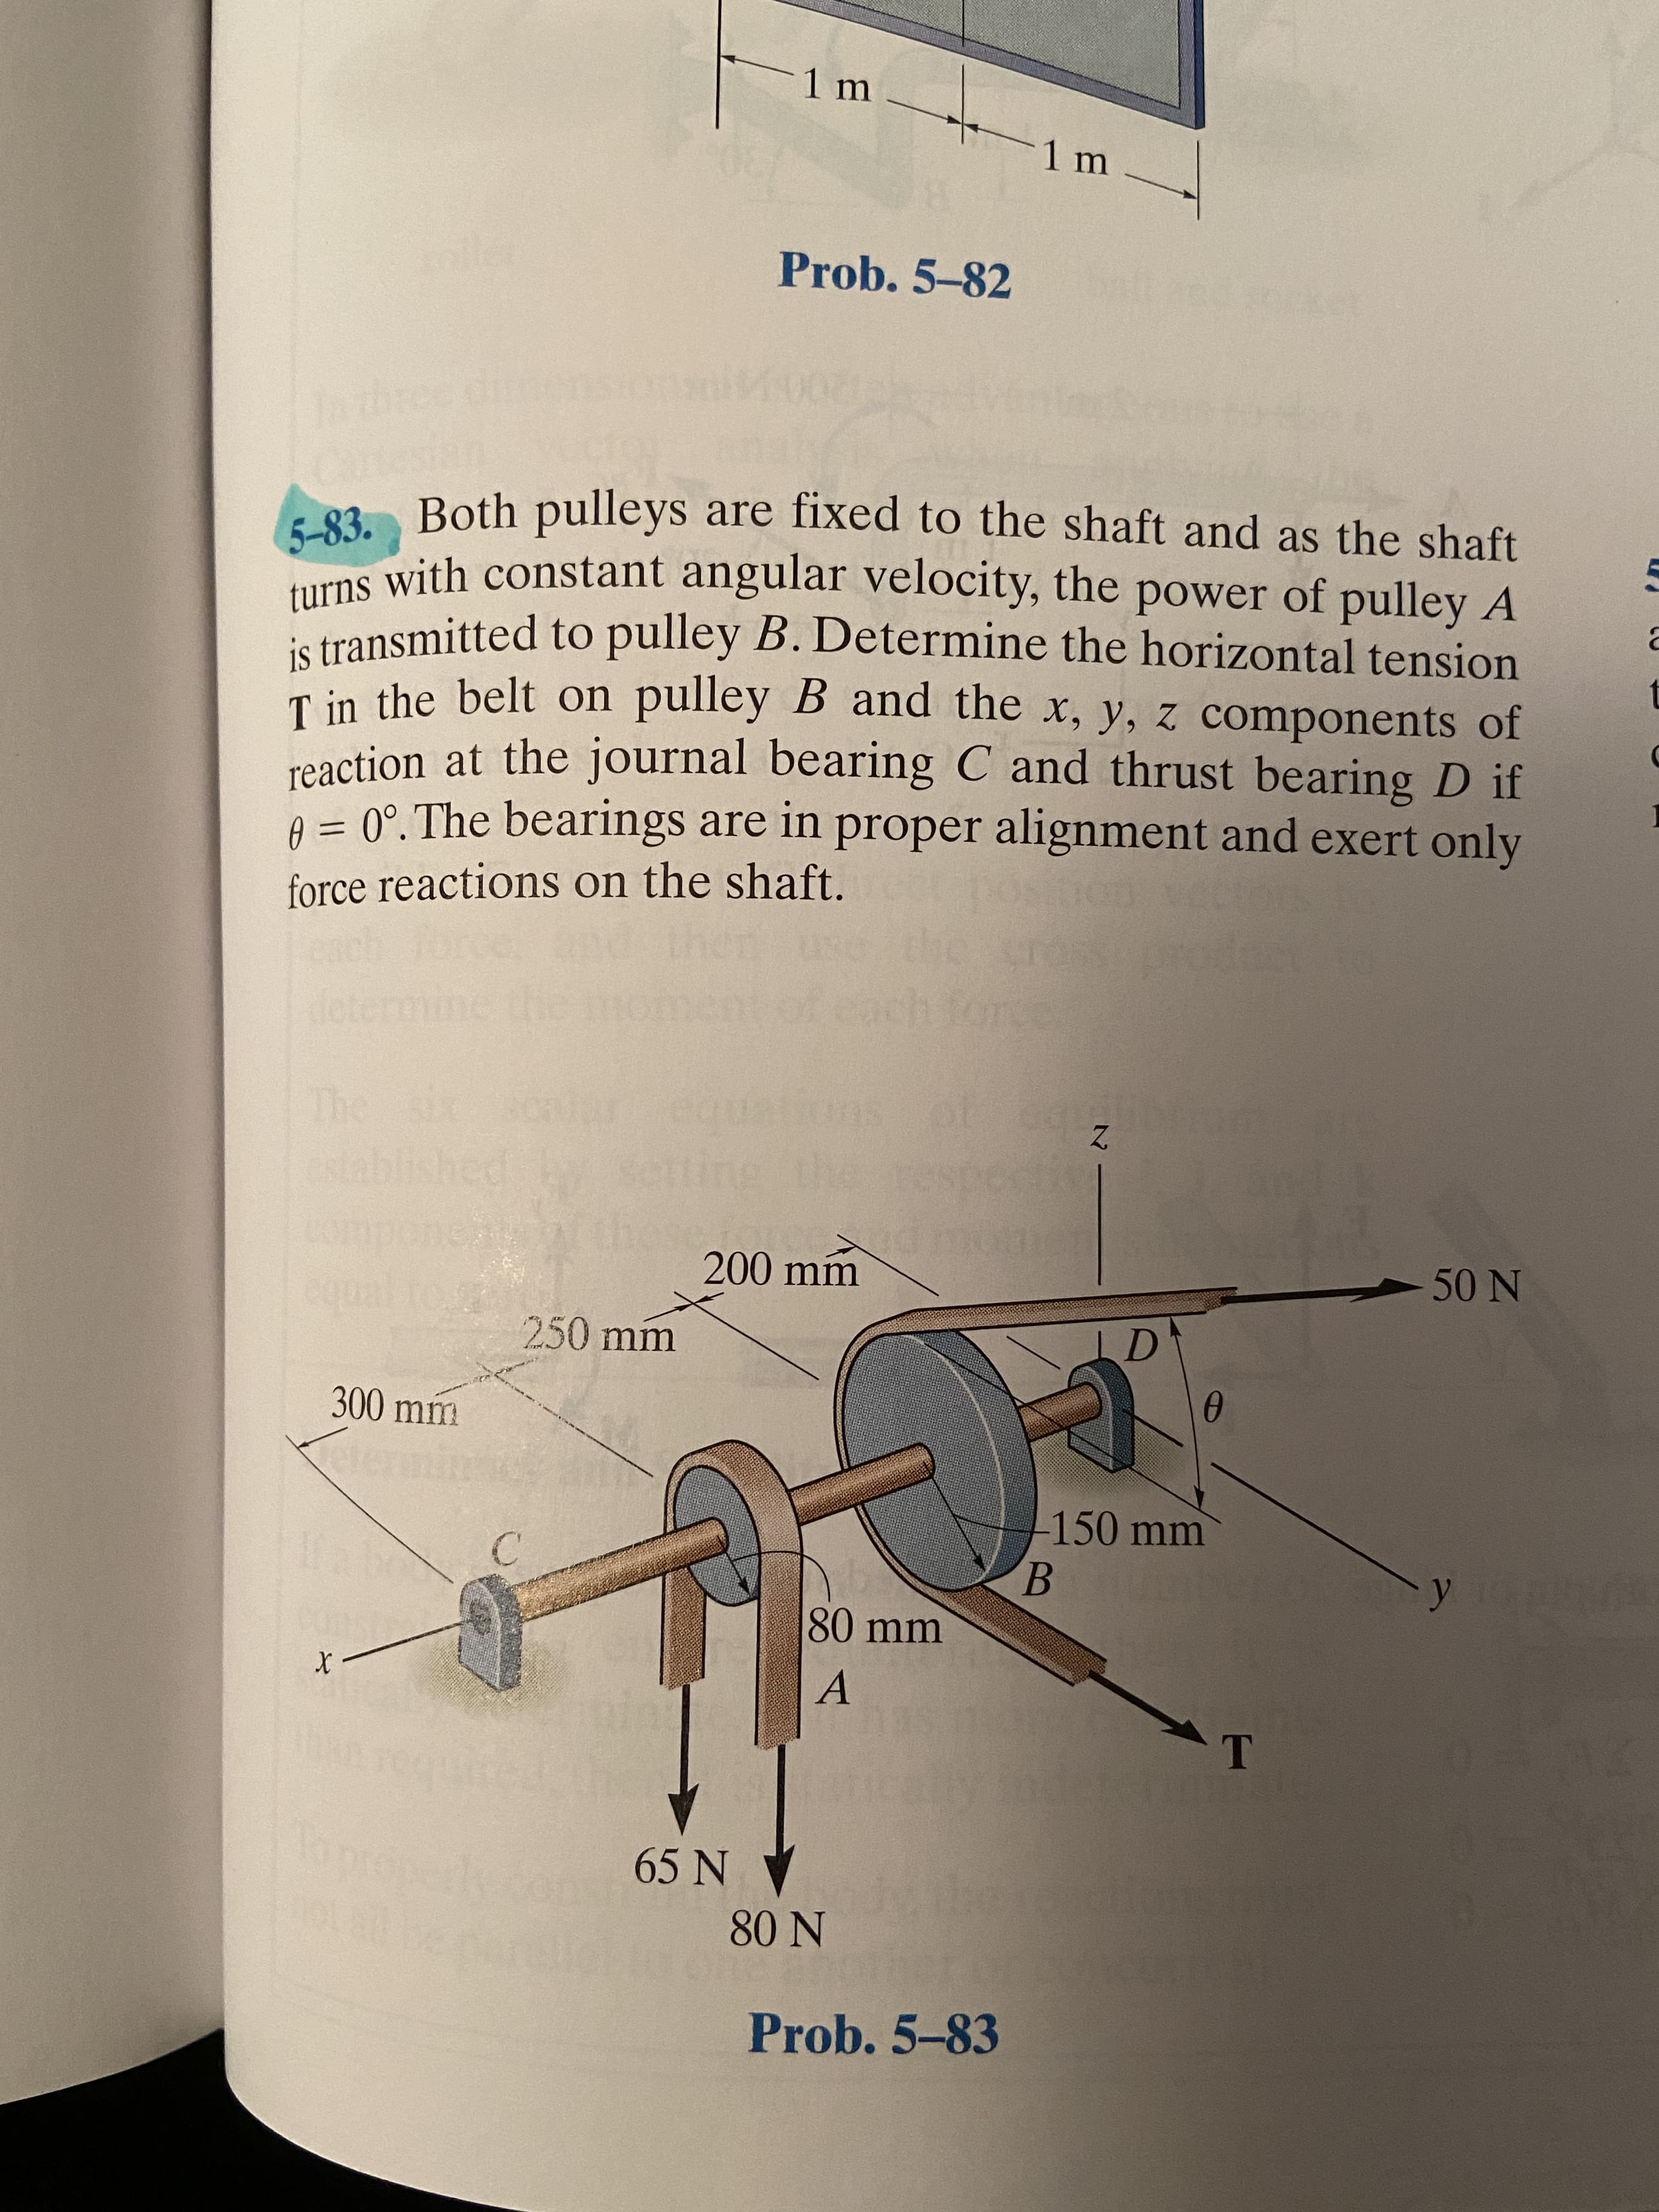 1 m
aile
Prob. 5-82
ket
Inthree di
5-83. Both pulleys are fixed to the shaft and as the shaft
turns with constant angular velocity, the power of pulley A
is transmitted to pulley B. Determine the horizontal tension
T in the belt on pulley B and the x, y, z components of
t
reaction at the journal bearing C and thrust bearing D if
A = 0°.The bearings are in proper alignment and exert only
force reactions on the shaft.
determine the
me
each force
The
Theix
established
200 mm
50 N
250 mm
LD
300 mm
-150 mm
B.
EGO
80 mm
65 N
80 N
Prob. 5-83
